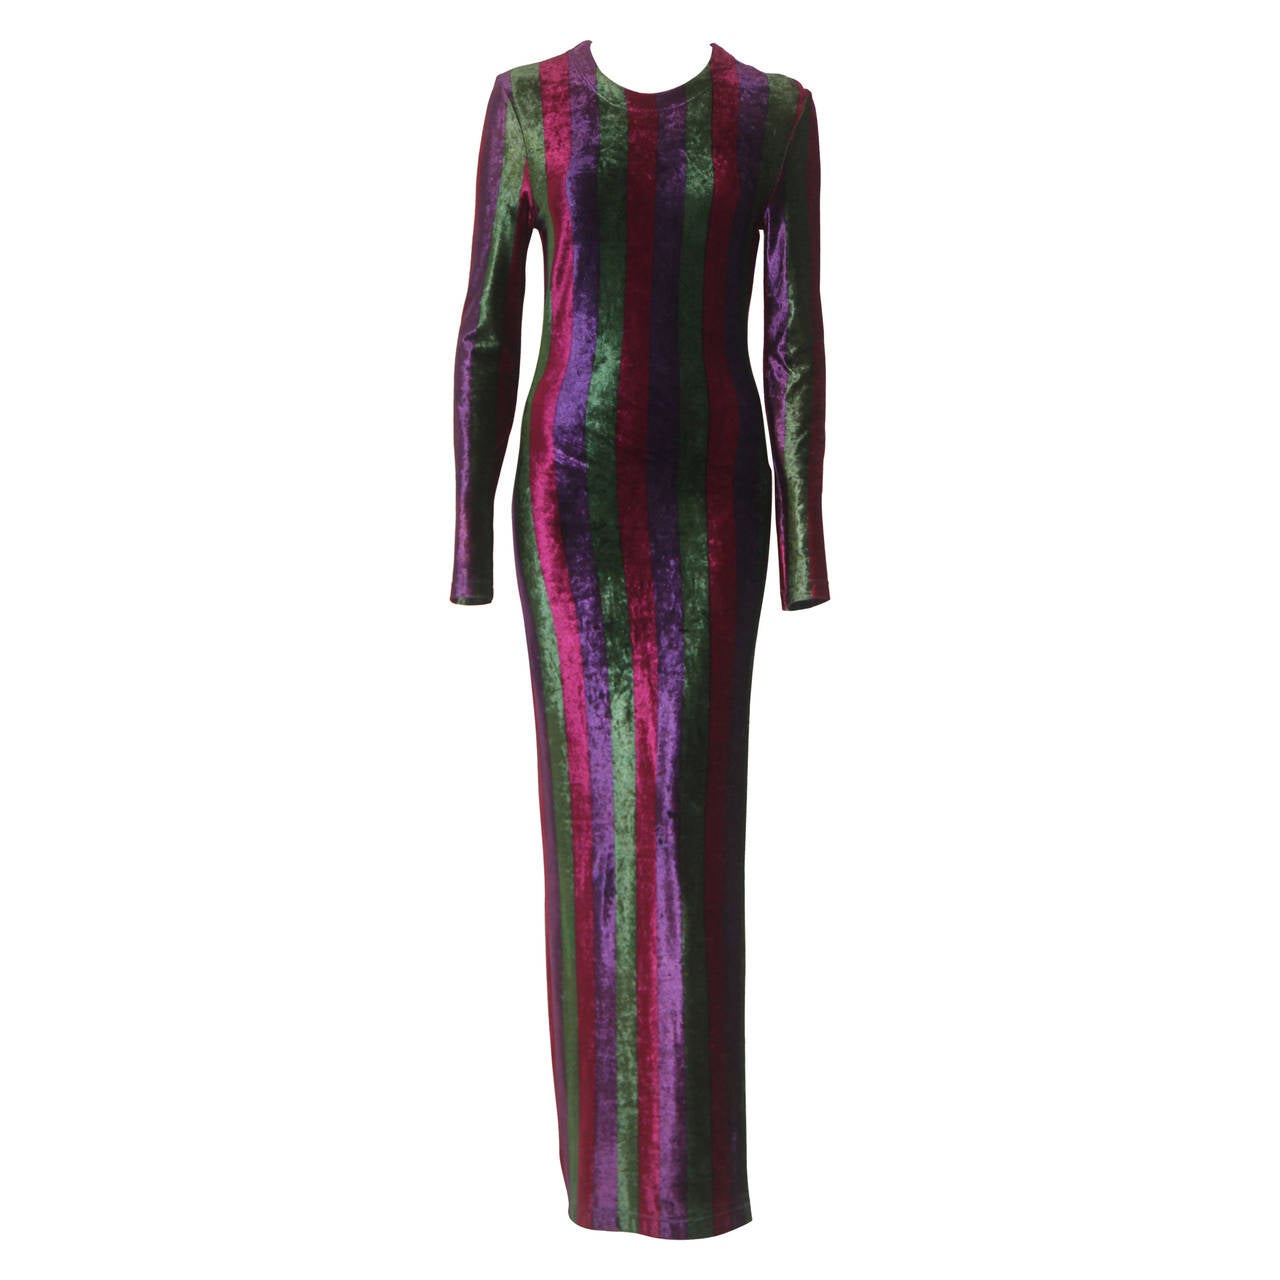 Iconic Gianni Versace Striped Velvet Stretch Evening Gown Fall 1993 For Sale